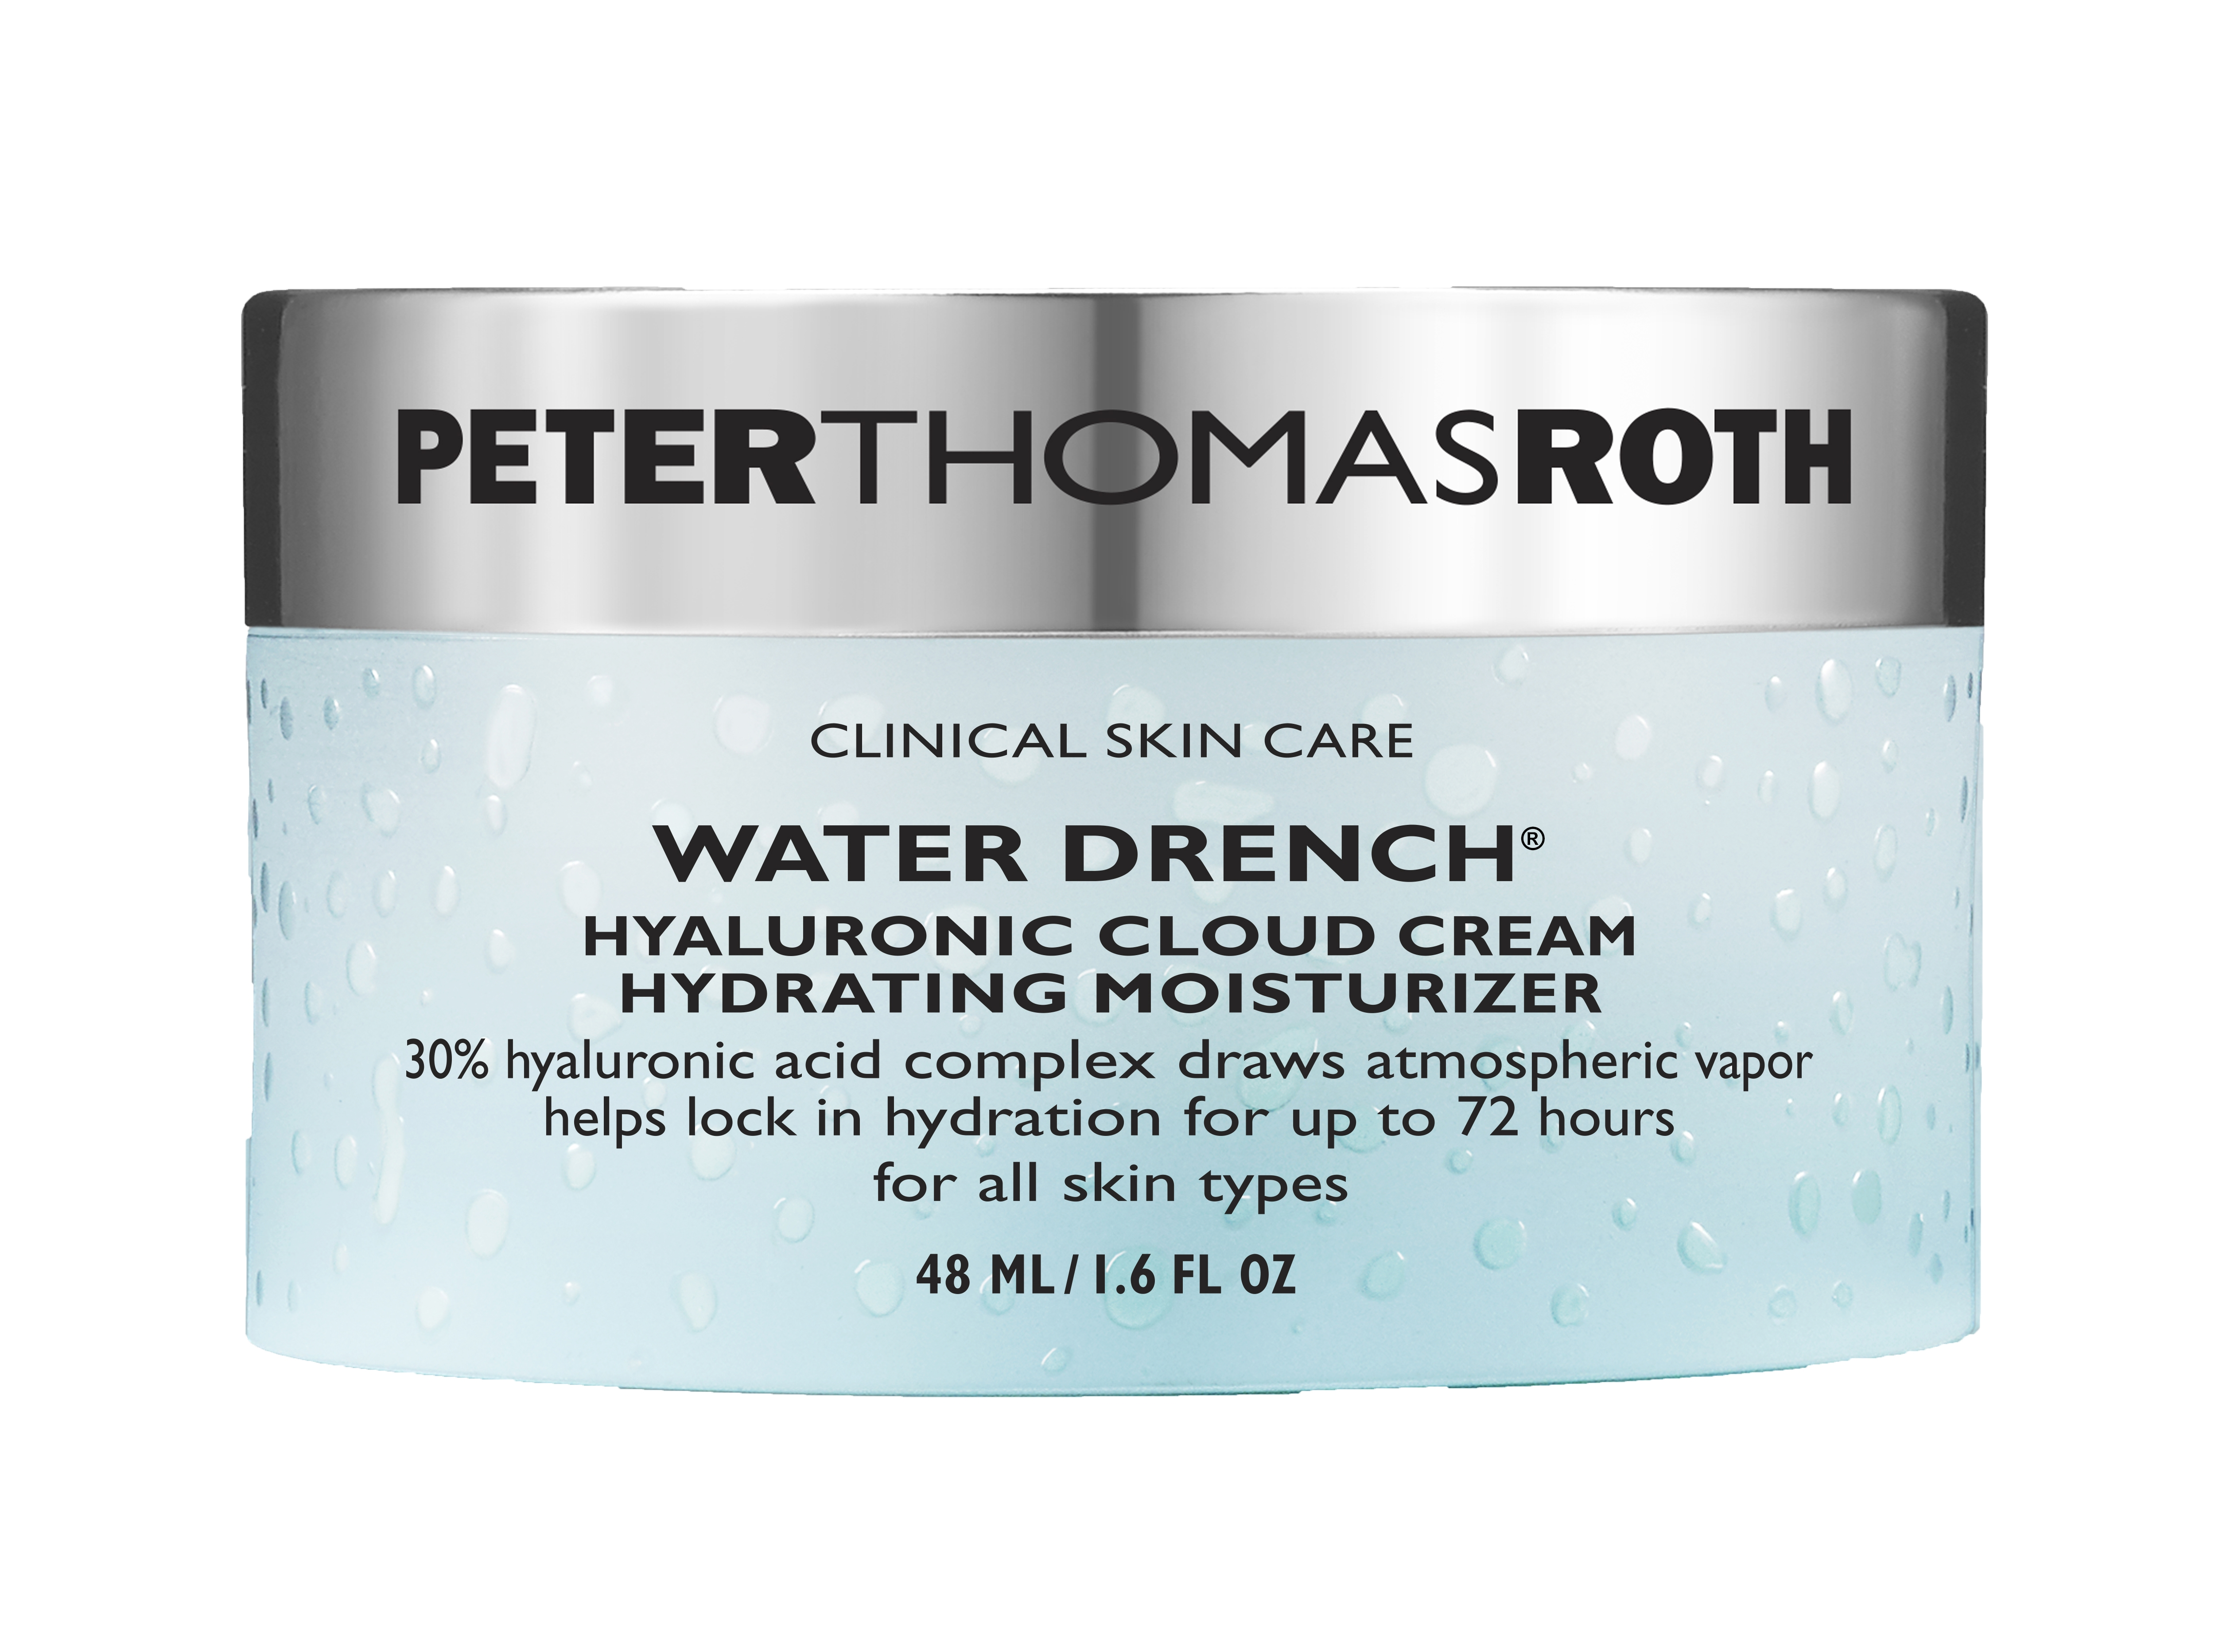 Billede af Peter Thomas Roth Water Drench Hyaluronic Cloud Cream 50 ml.